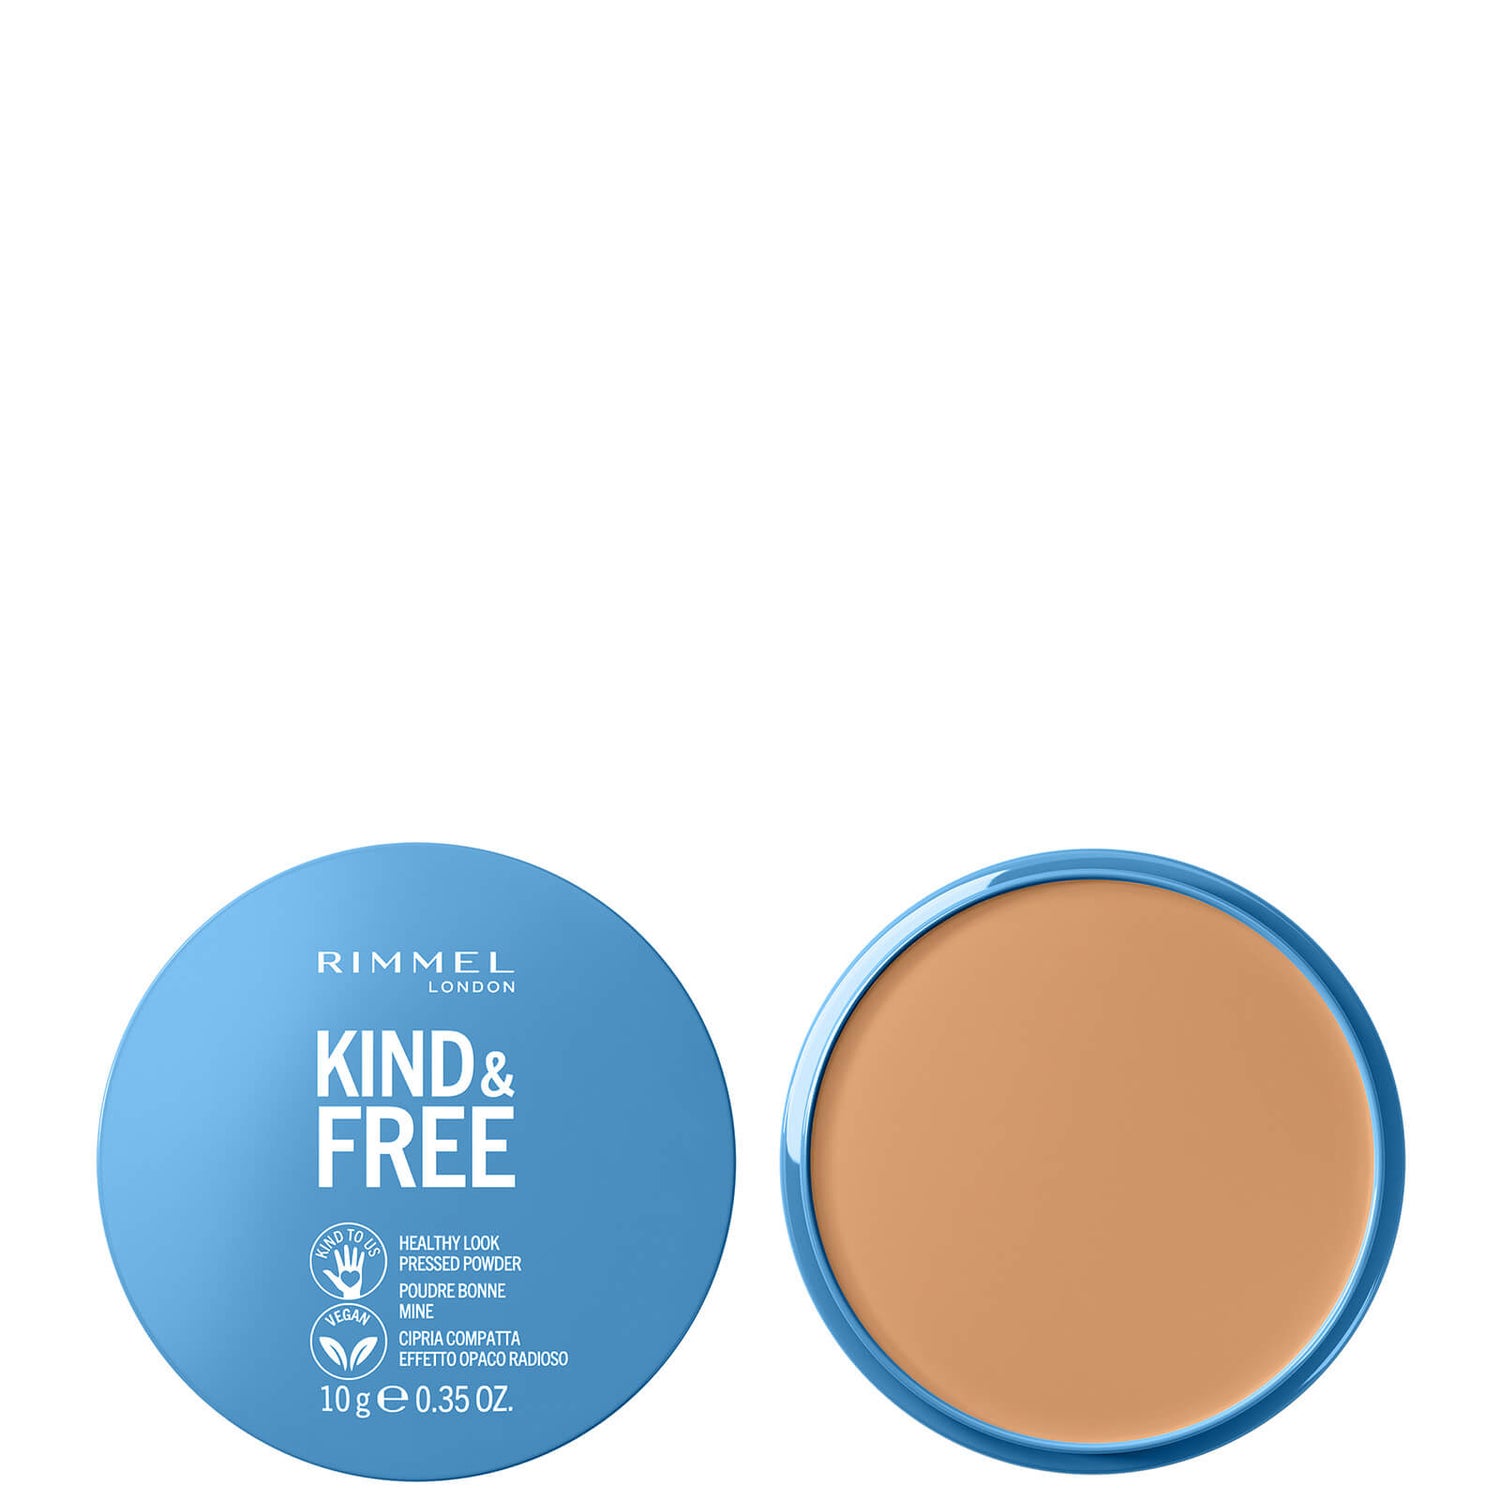 Rimmel Kind and Free Pressed Powder 10g (Various Shades)